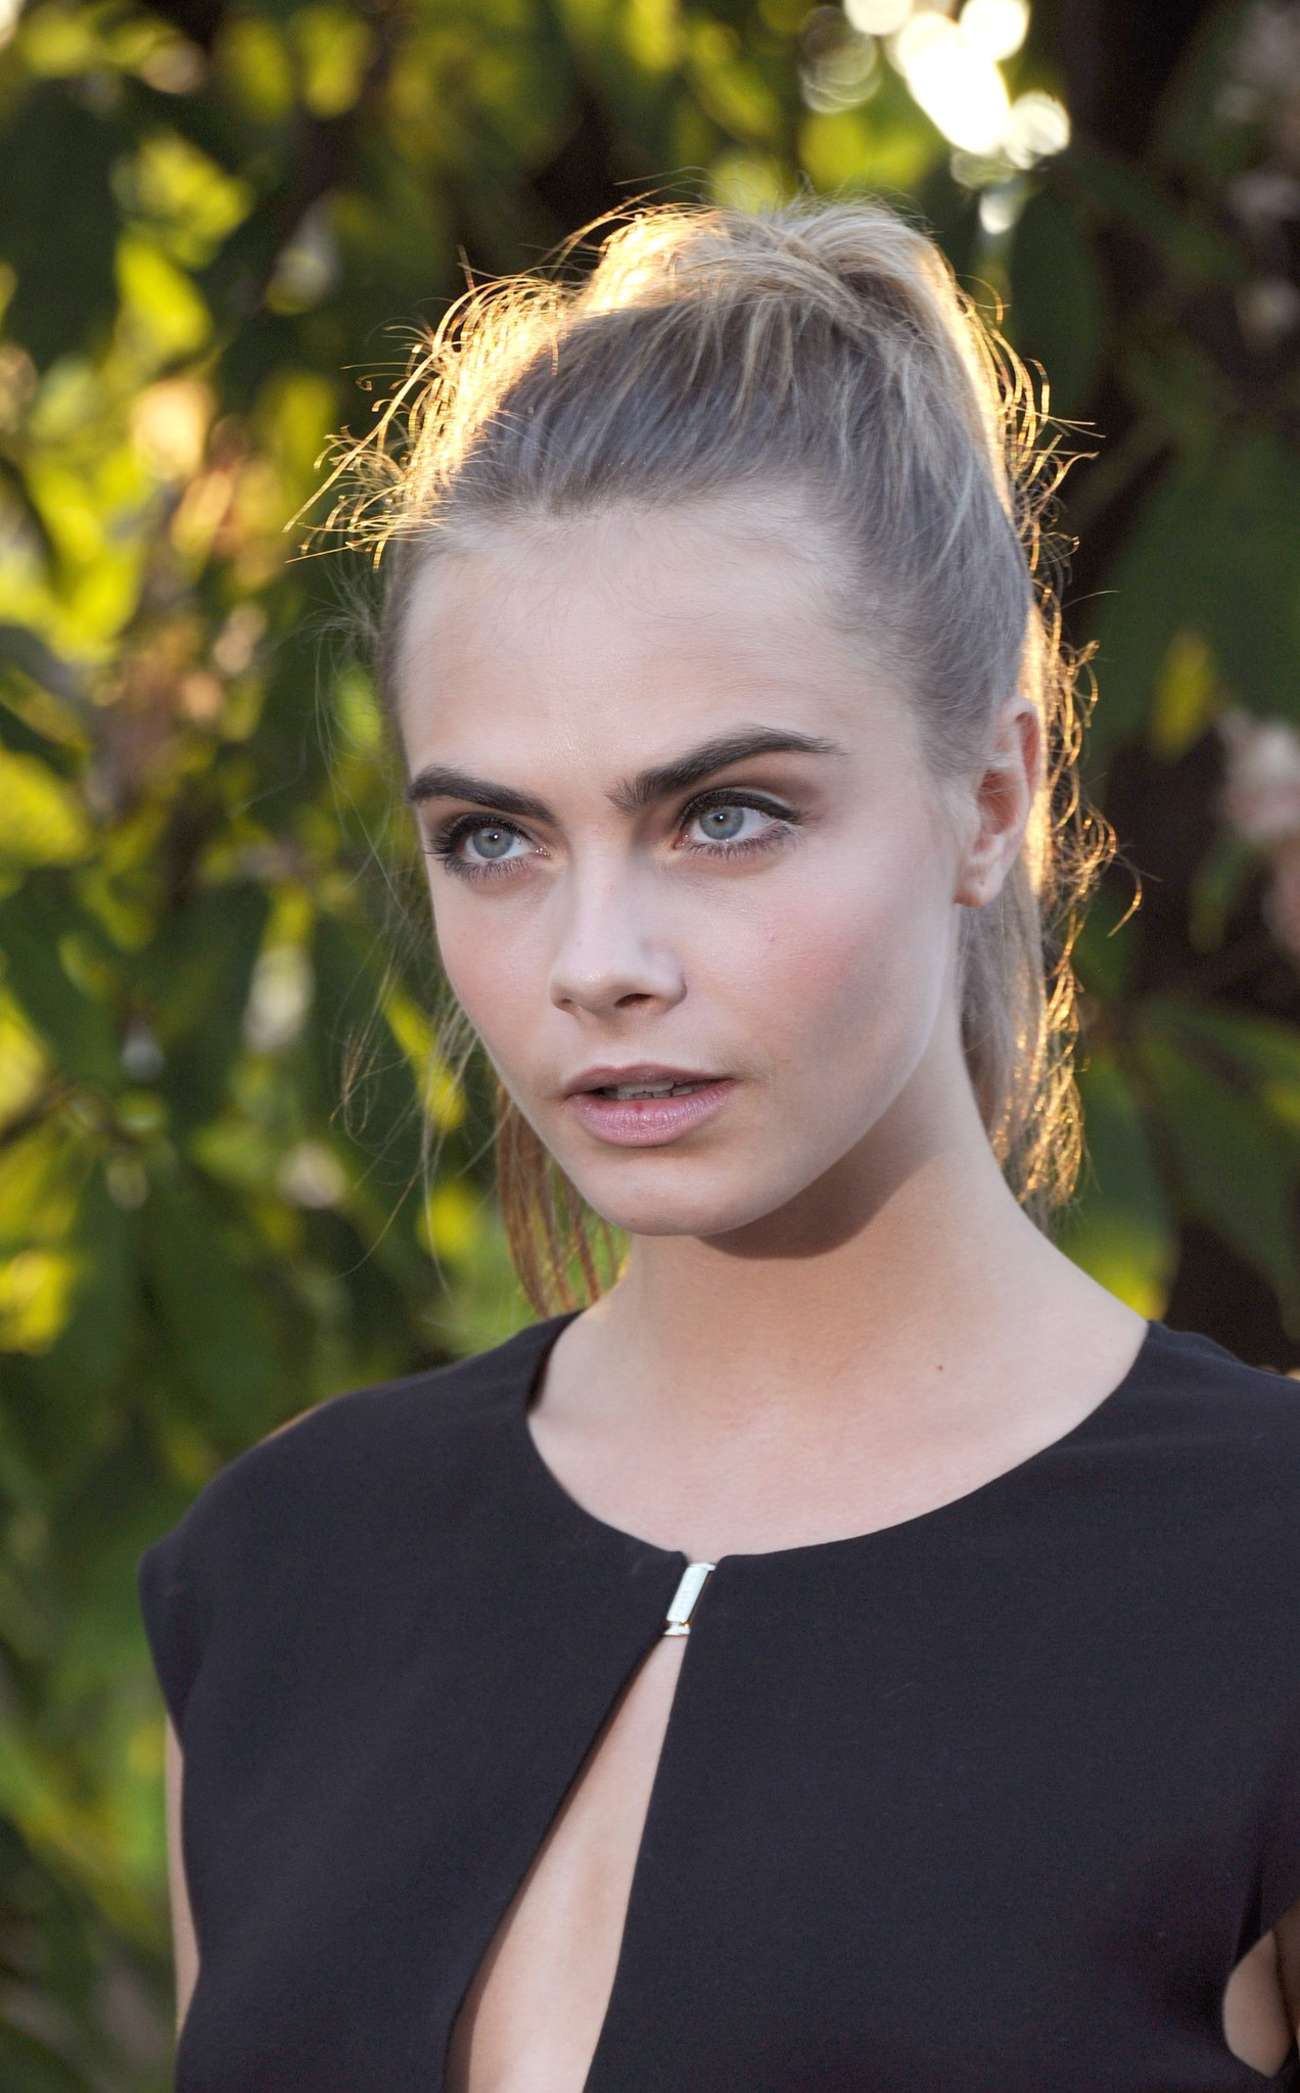 Cara Delevingne at 2014 Serpentine Gallery Summer Party in London ...